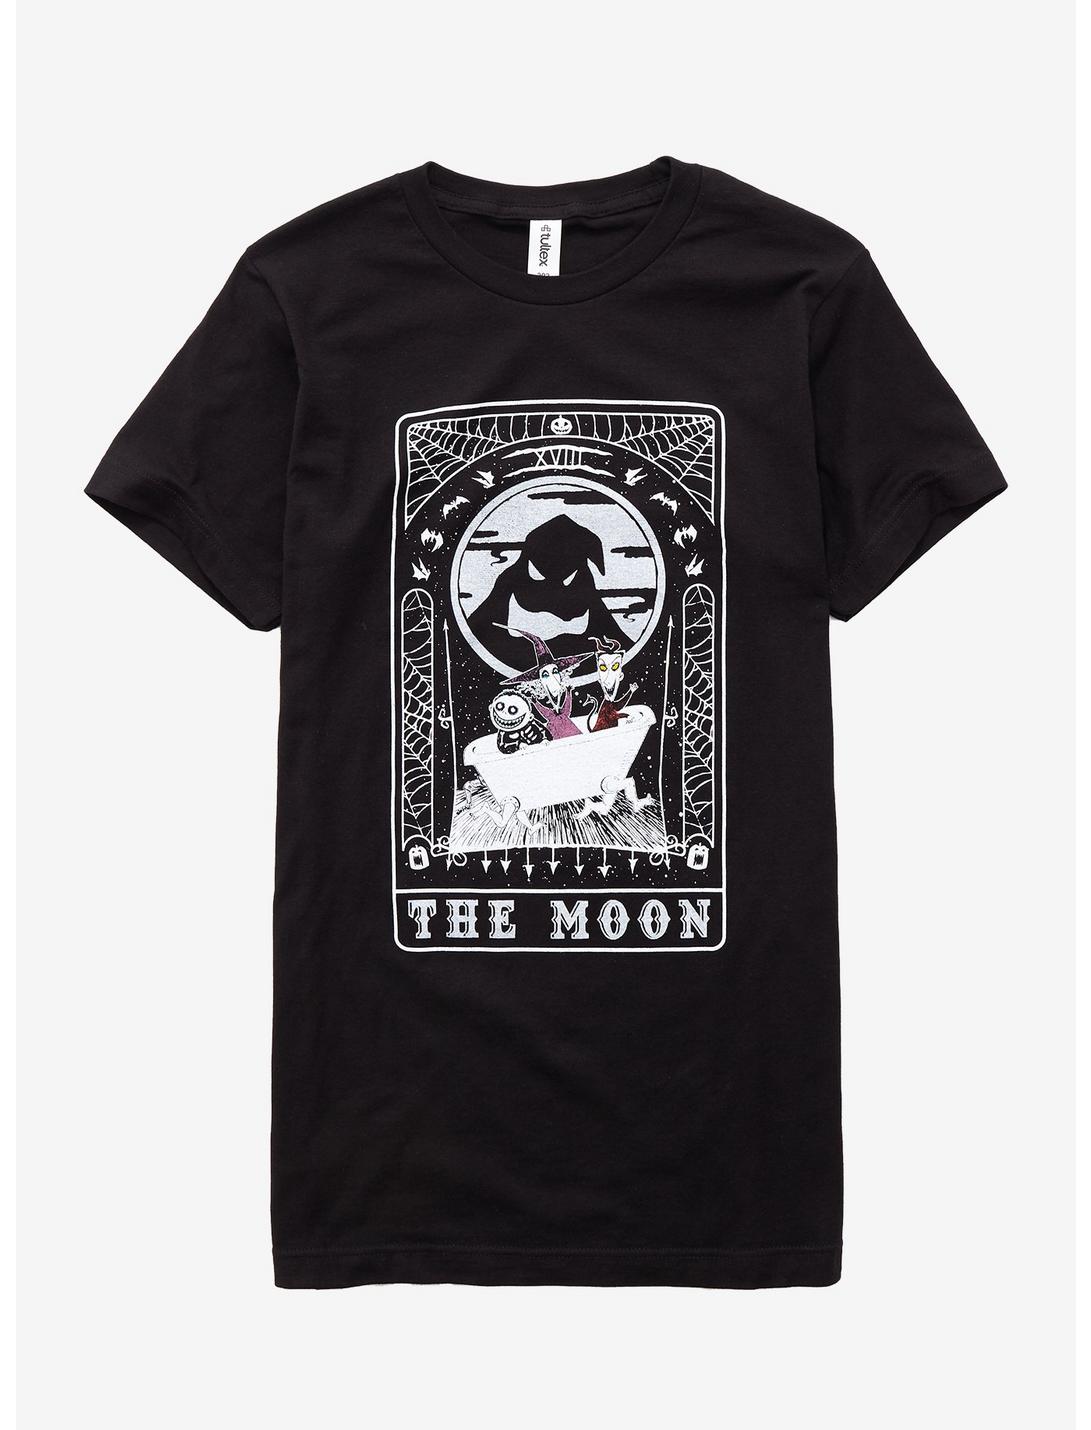 The Nightmare Before Christmas The Moon Tarot Card Girls T-Shirt, WHITE, hi-res